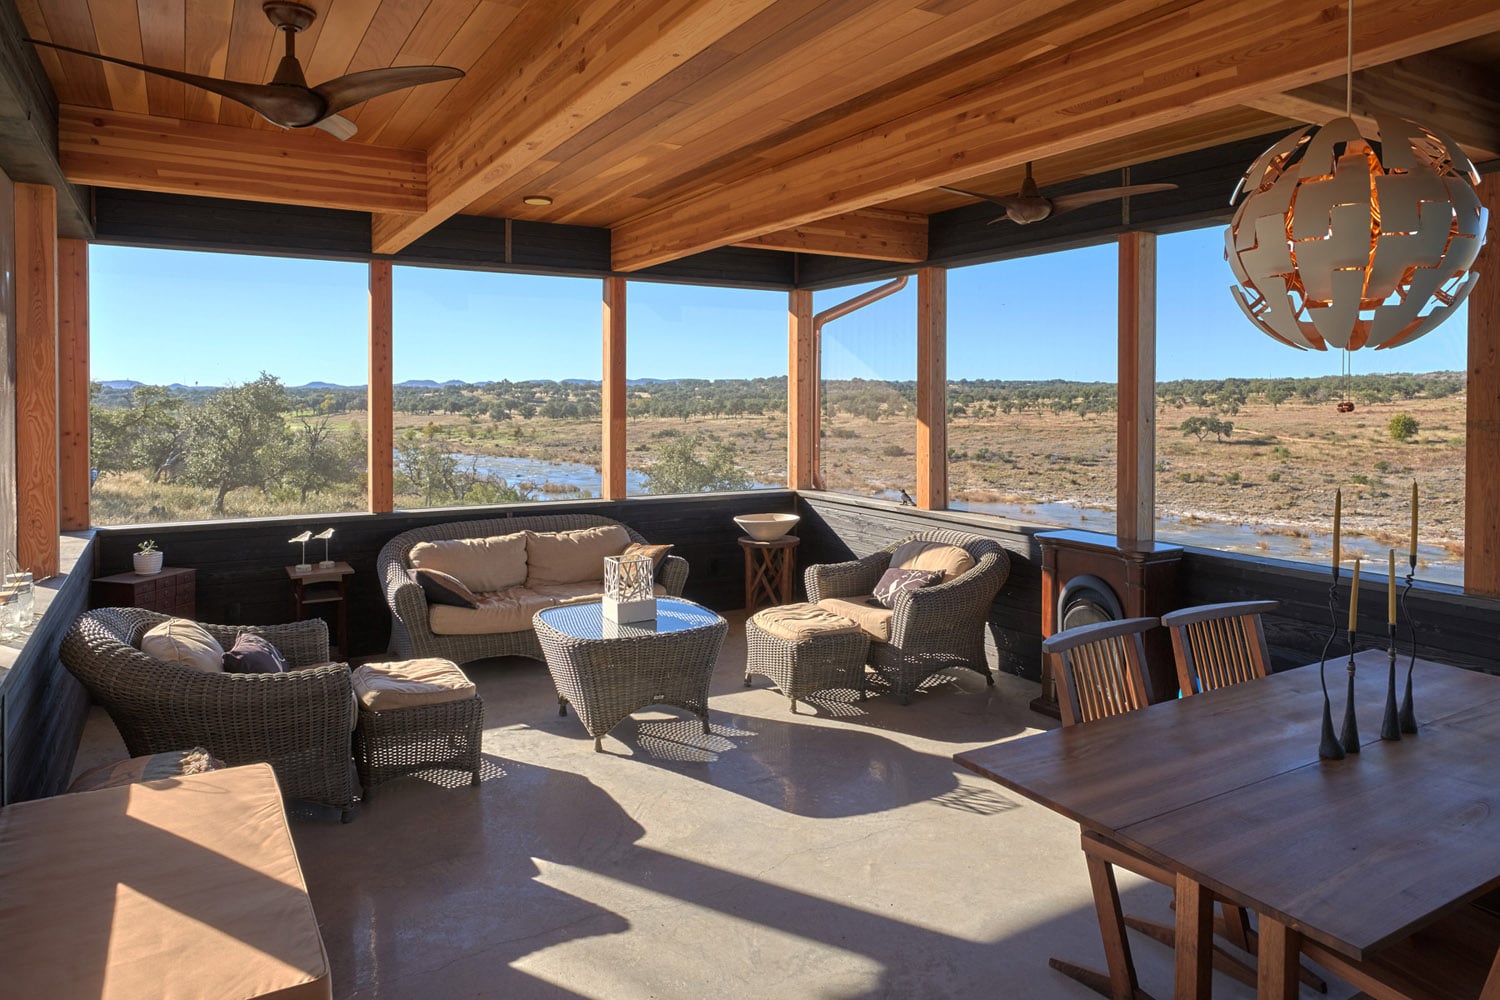 Epic views at Jeff Derebery’s custom Lindal Hestia home in the Texas Hill Country, Johnson City